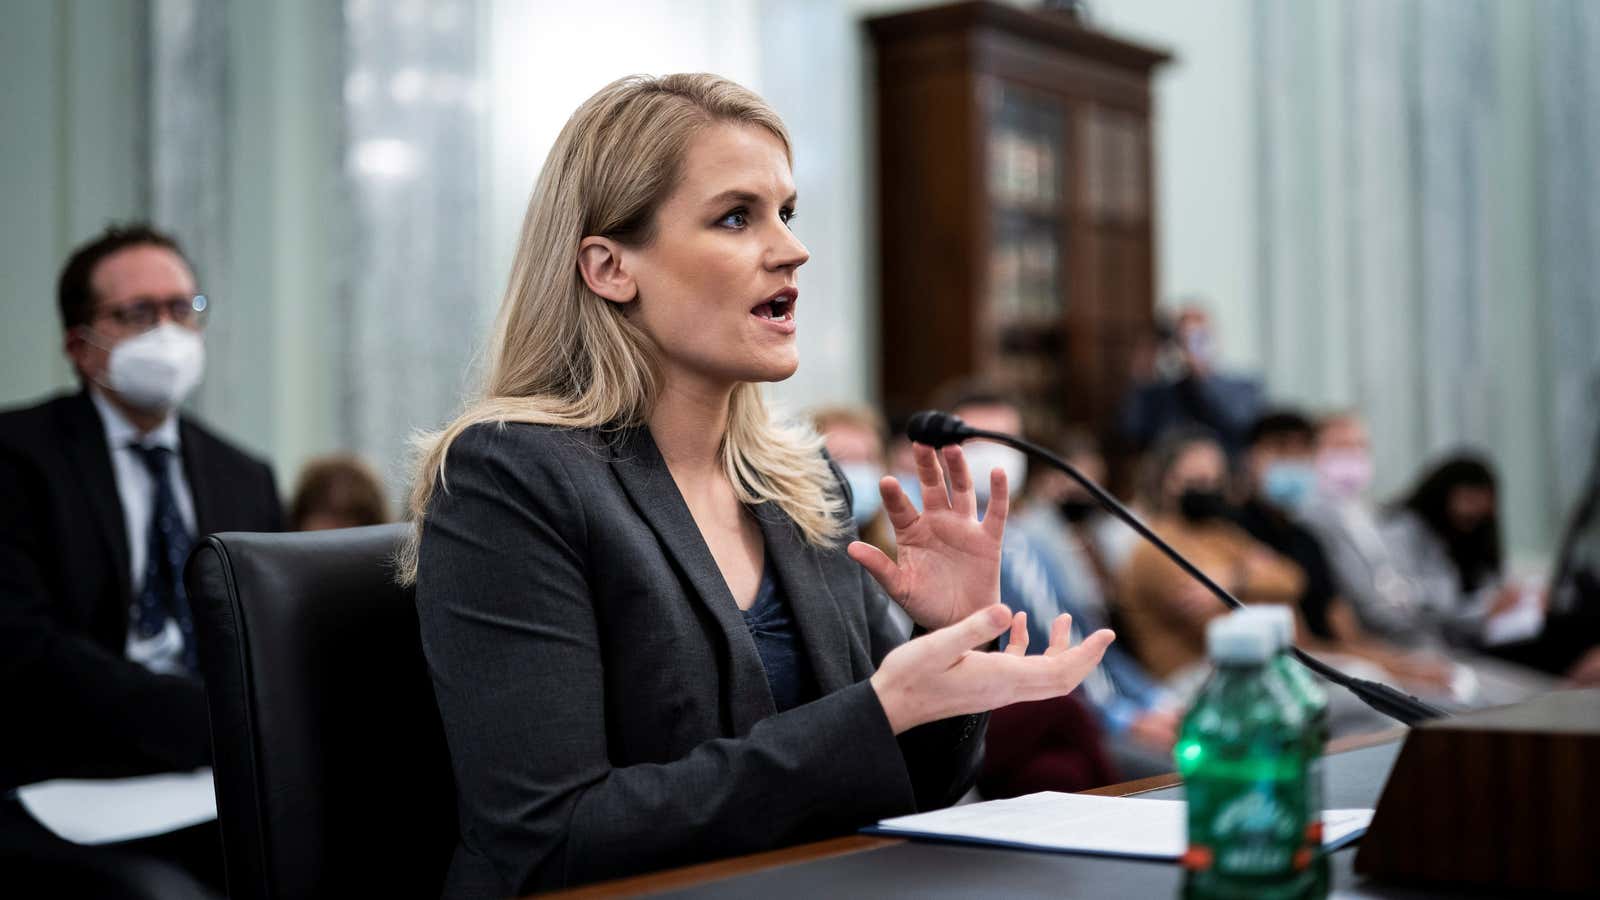 Former Facebook employee and whistleblower Frances Haugen testified in the Senate on Tuesday.